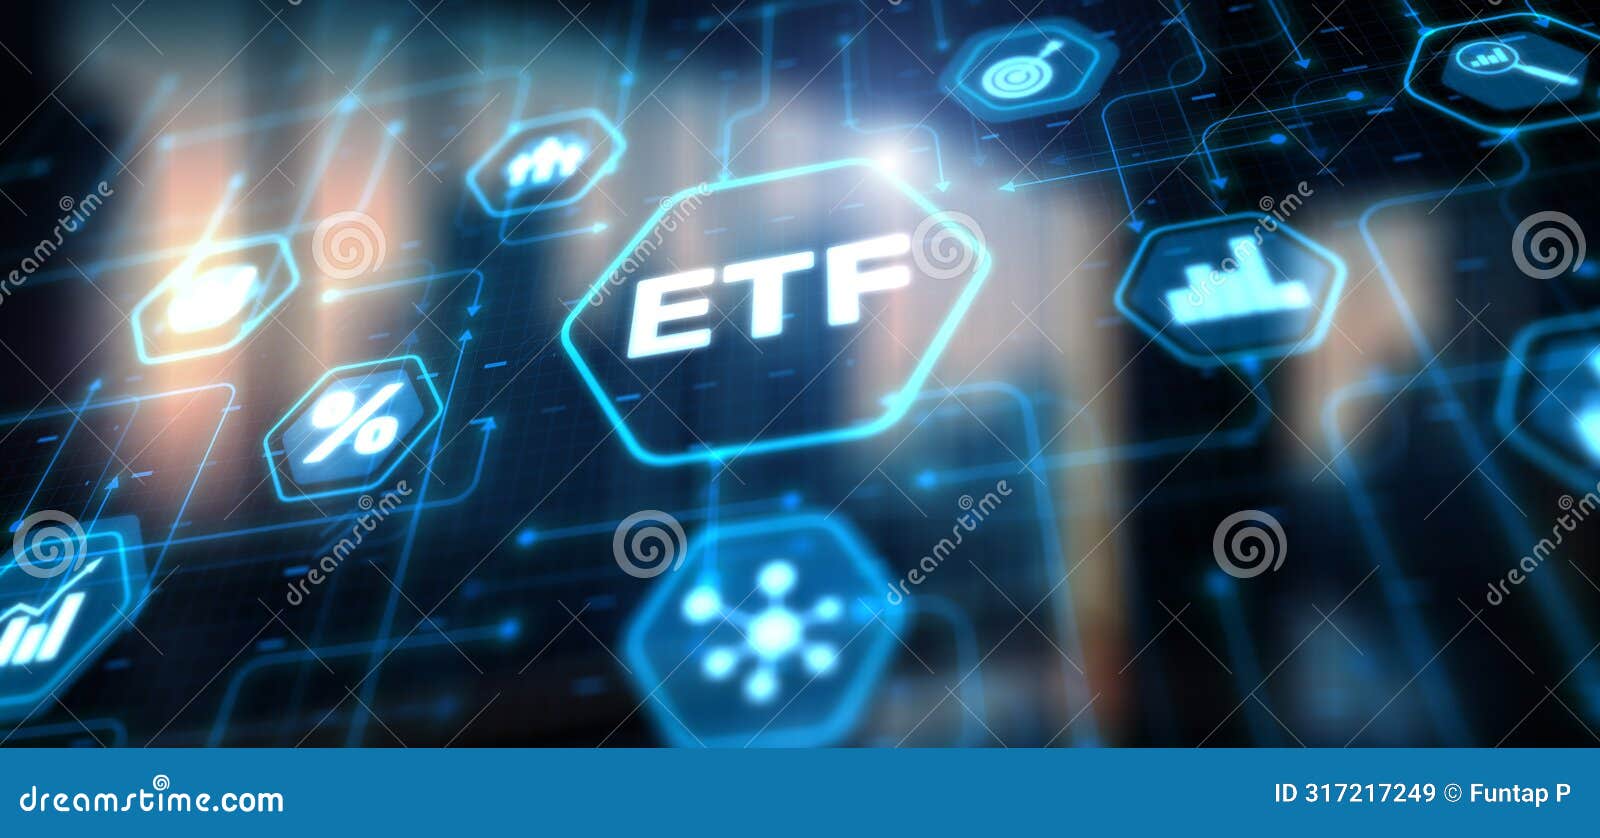 etf exchange traded fund investment finance concept. abstract background